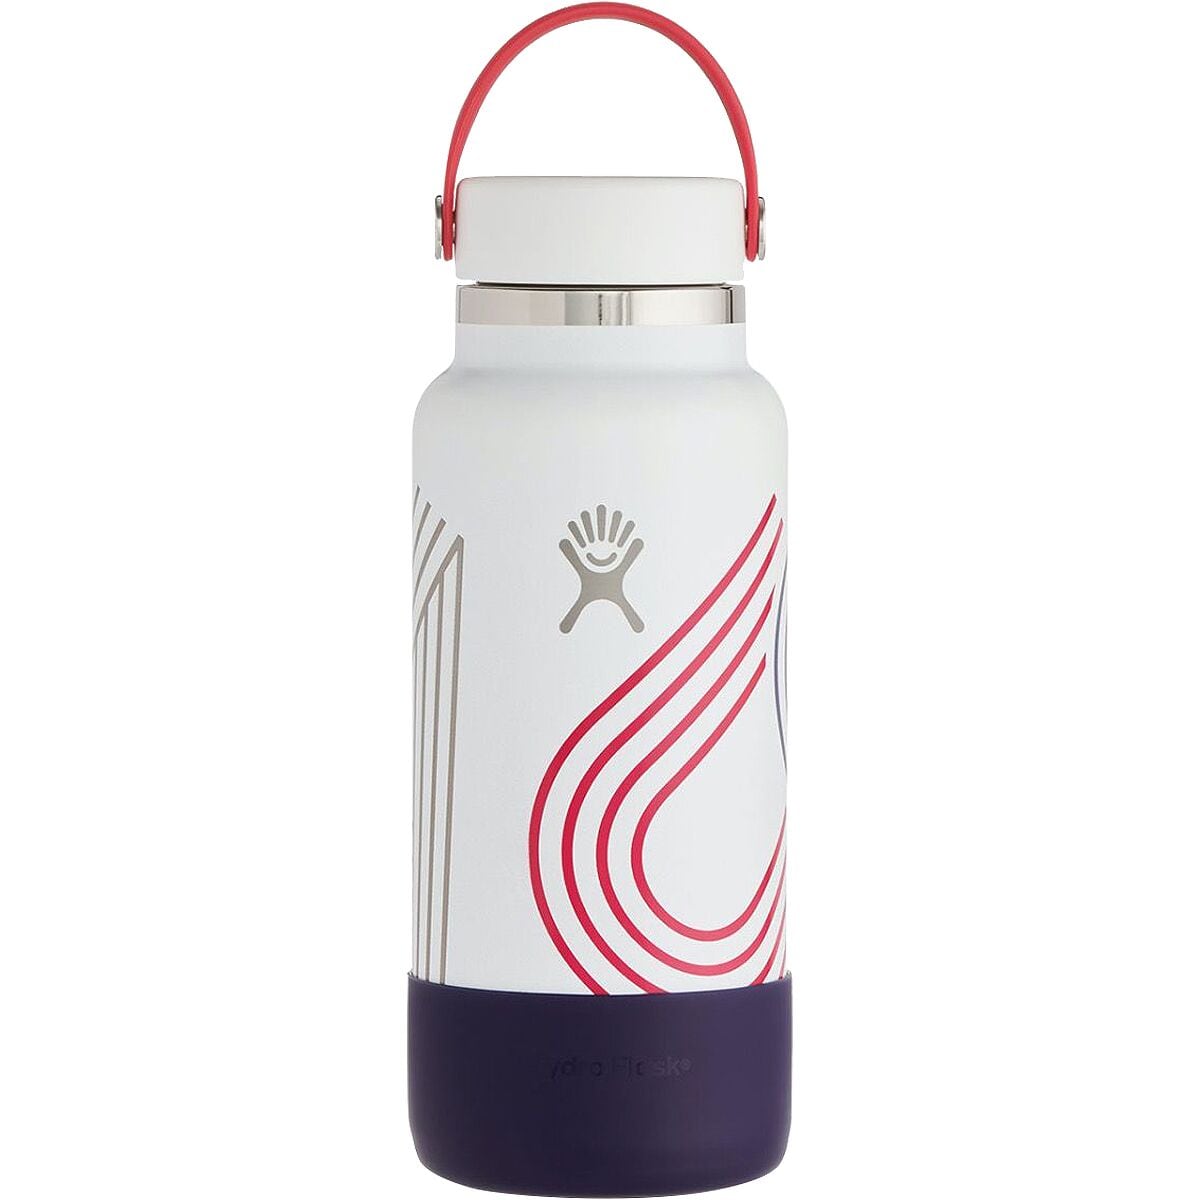 Hydro Flask 32 oz Wide Mouth Water Bottle - Special Edition - Banana - One Size